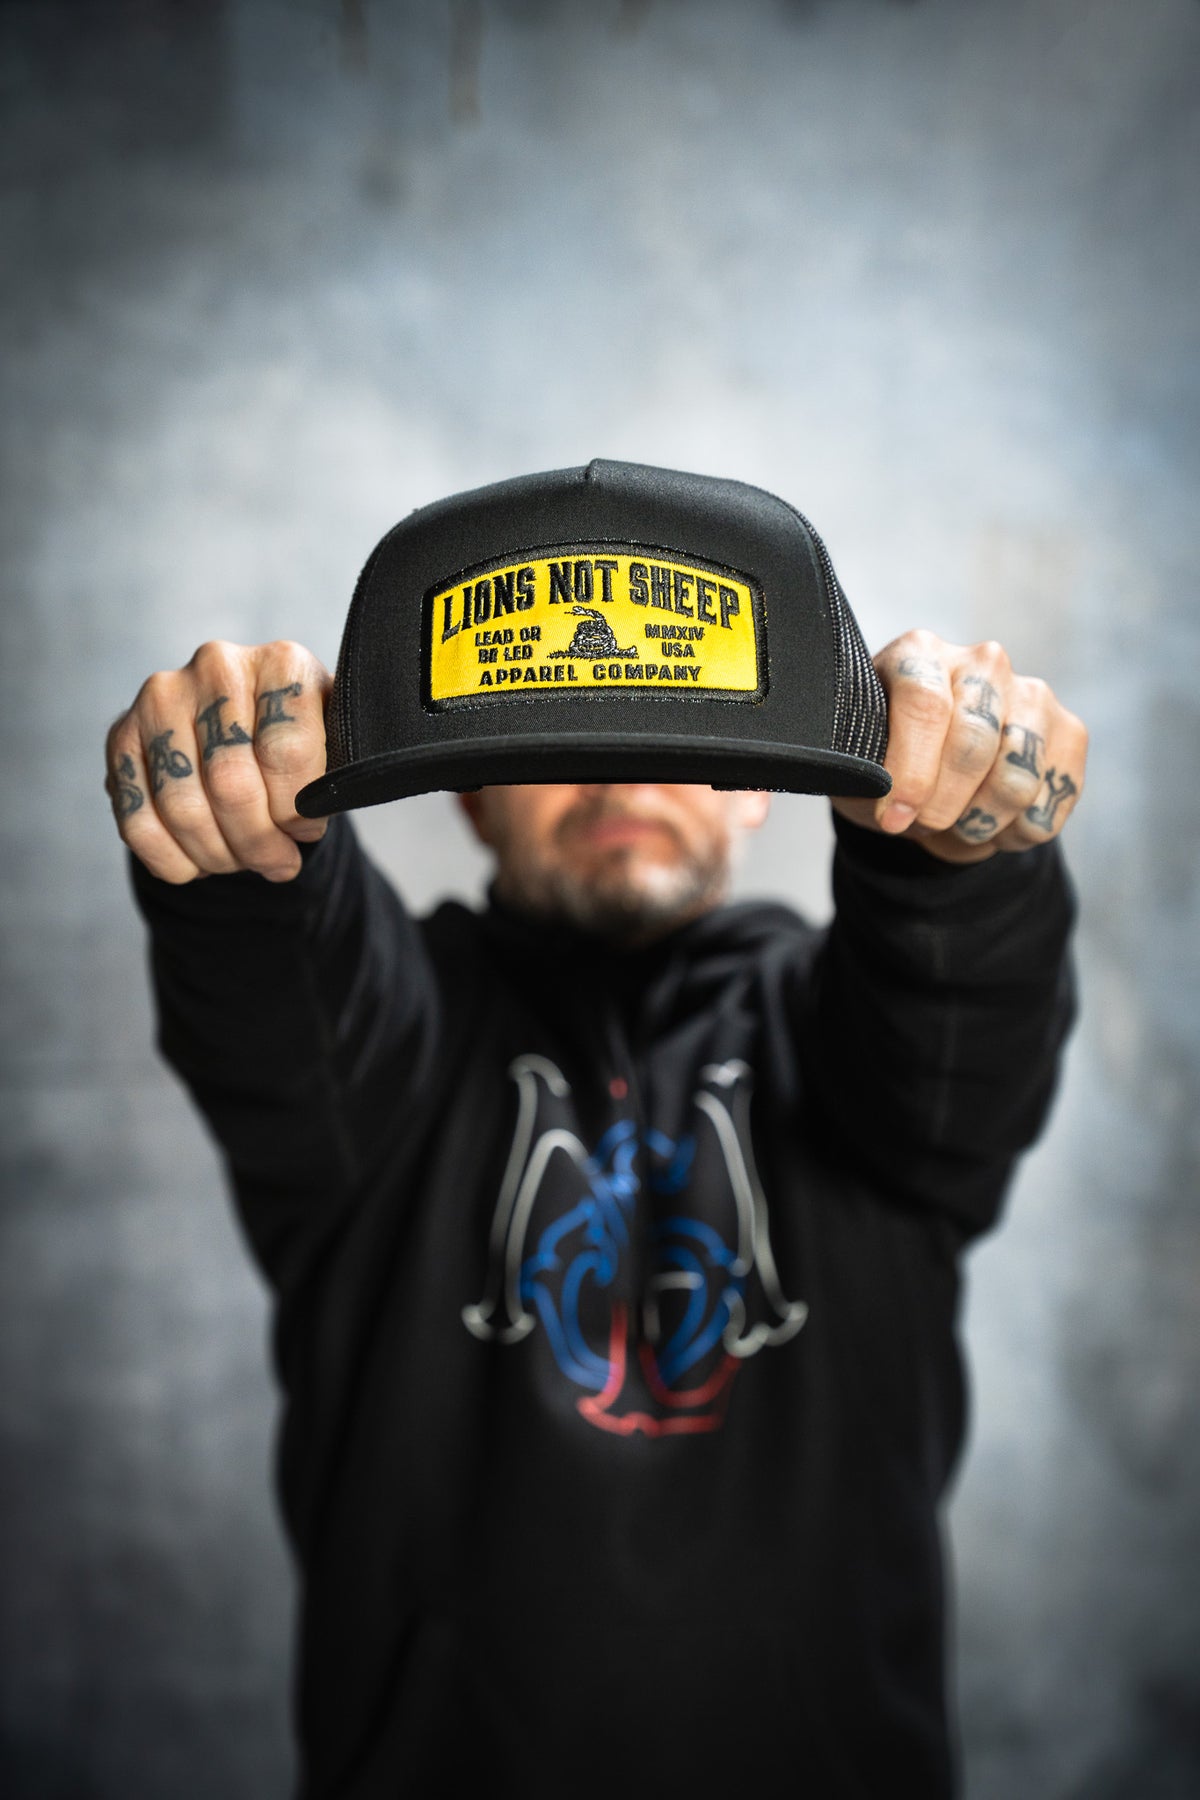 LEAD FROM THE FRONT Hat (Black/Yellow) - Lions Not Sheep ®